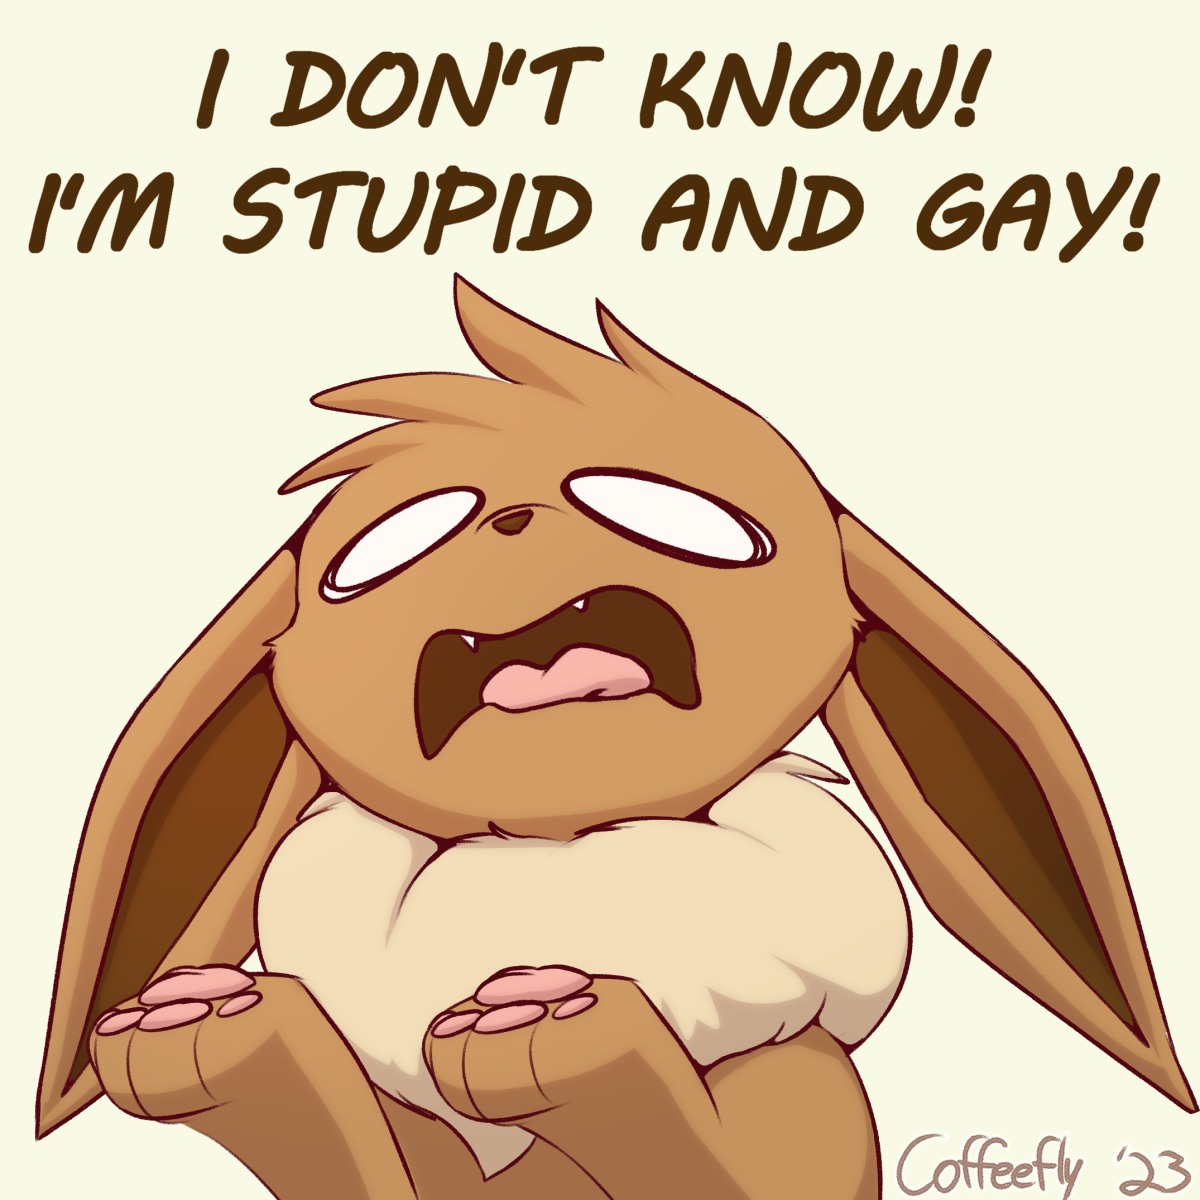 I don't know I'm stupid and gay!

[drawn Eevee in distress because they don't know, artist is Coffeefly]